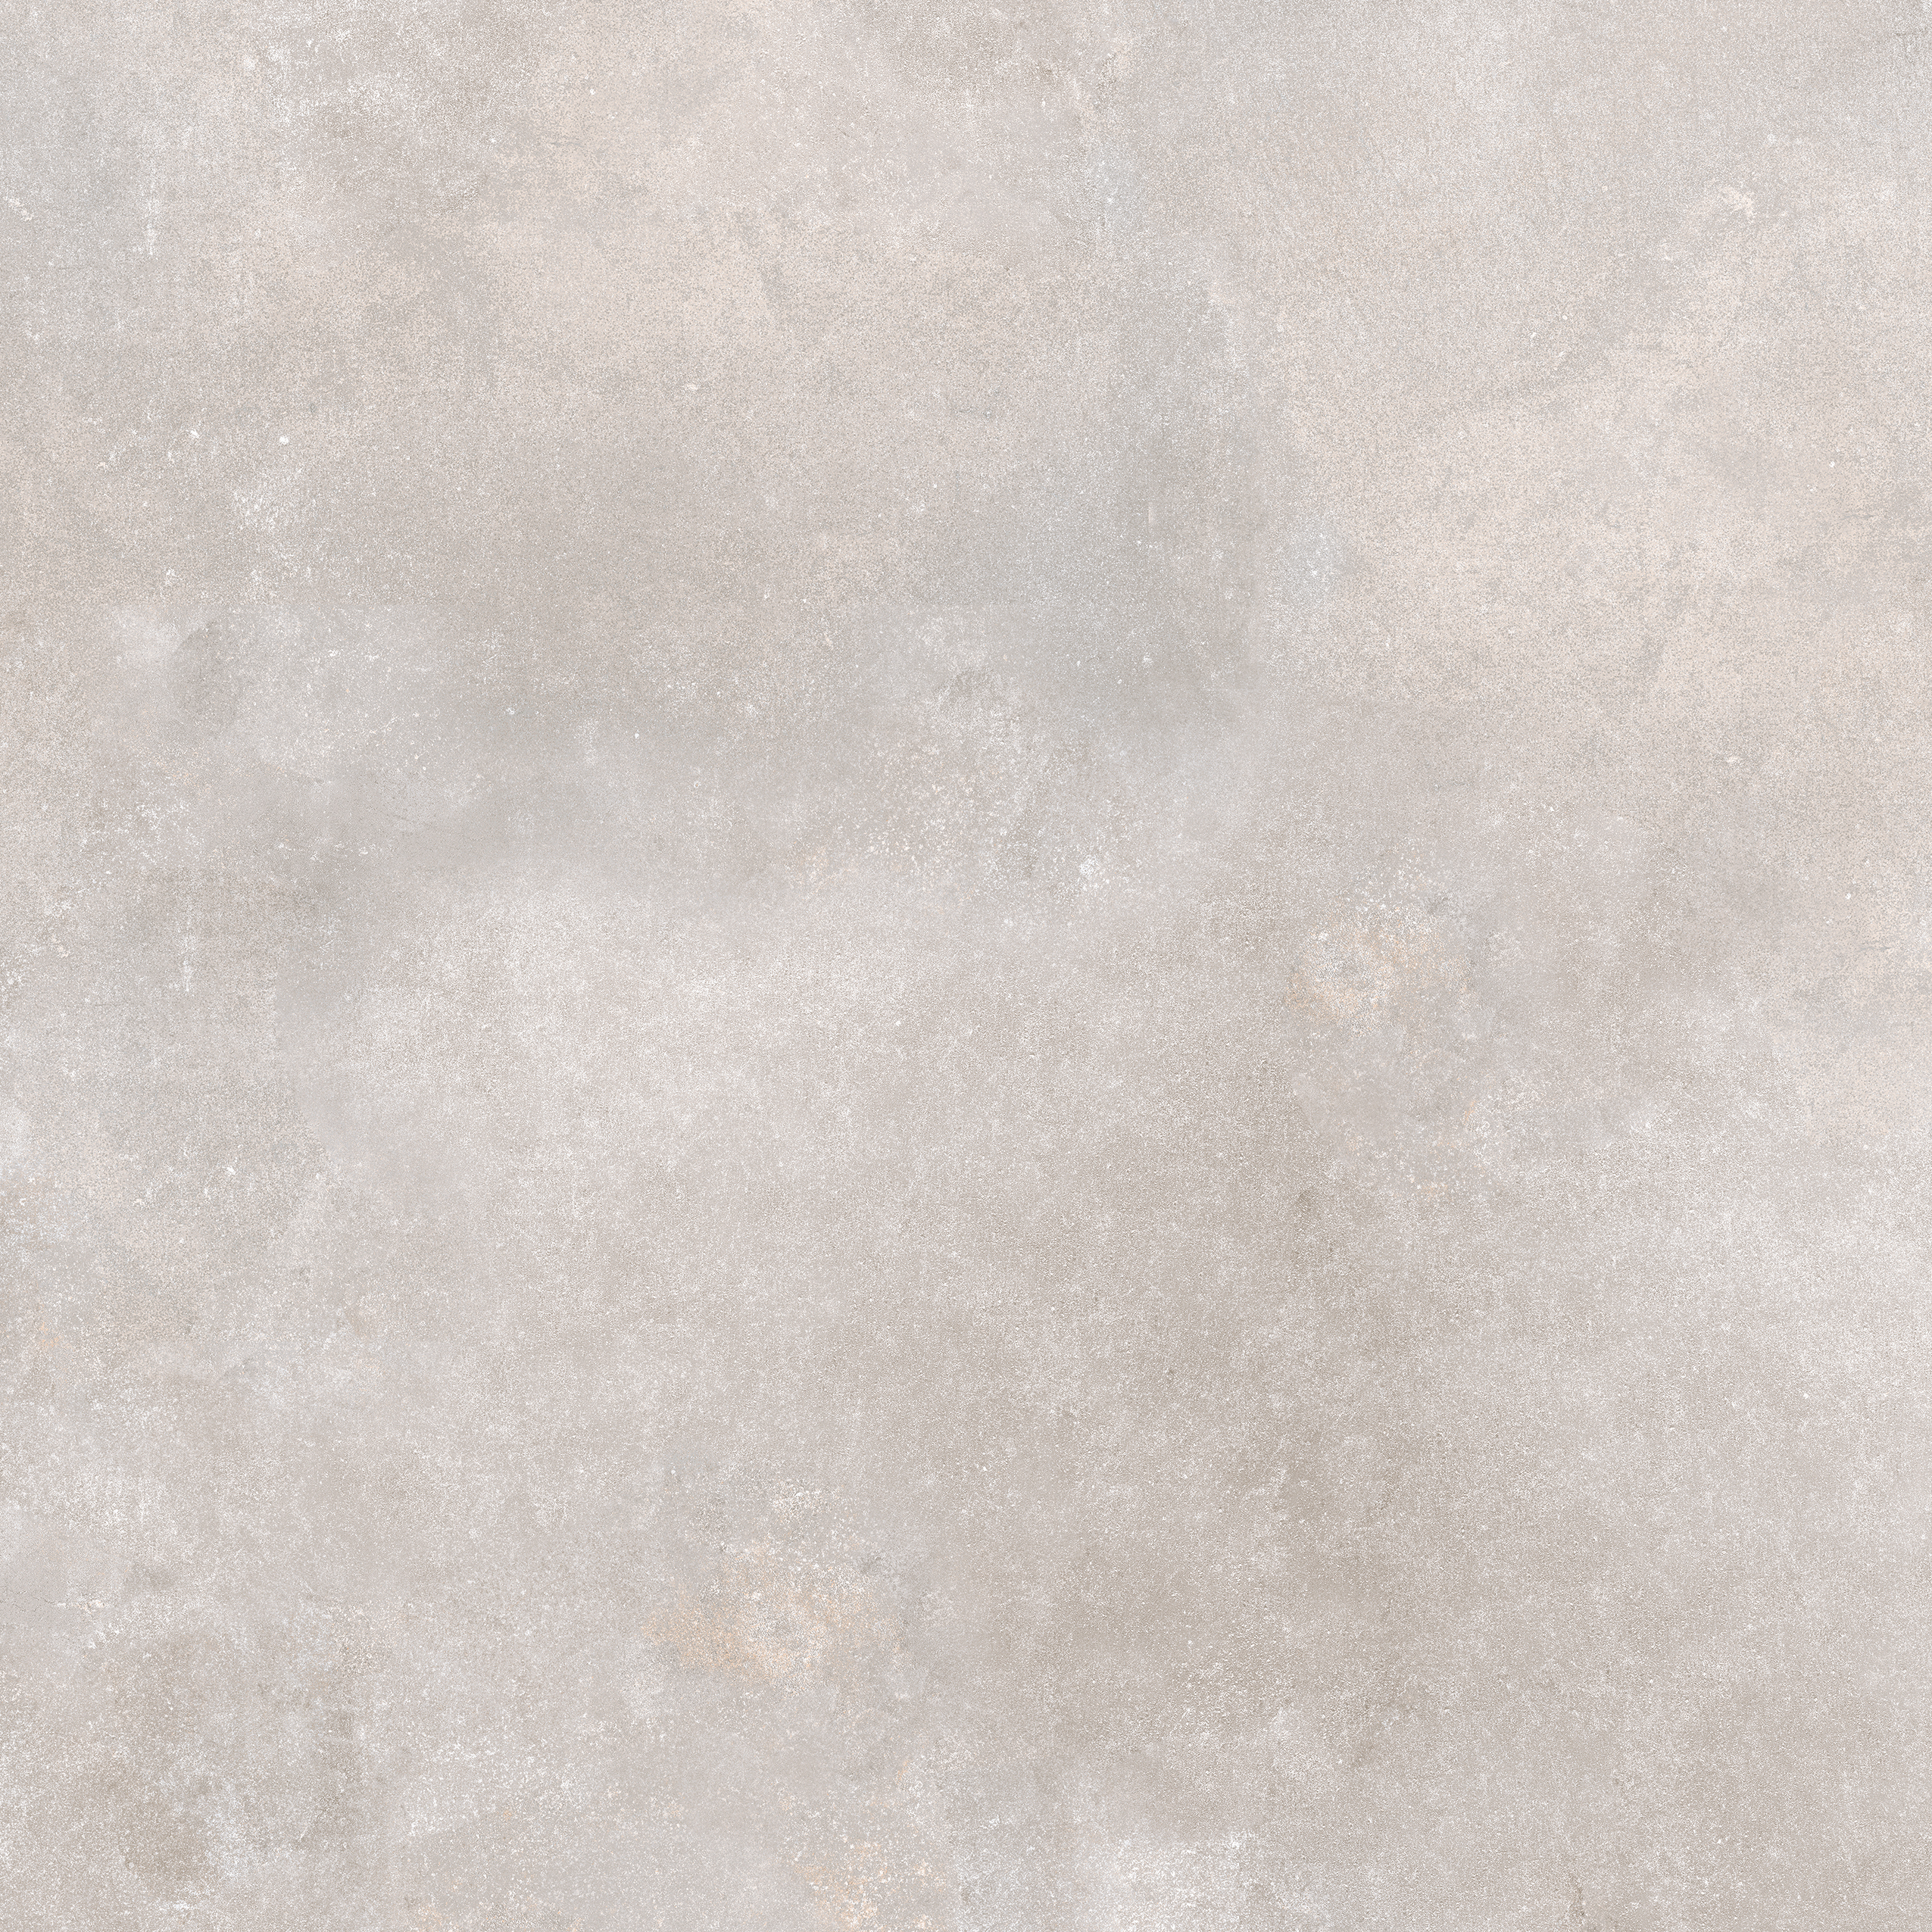 Saime Icon Taupe Naturale 8600575 60x60cm rectified 9mm